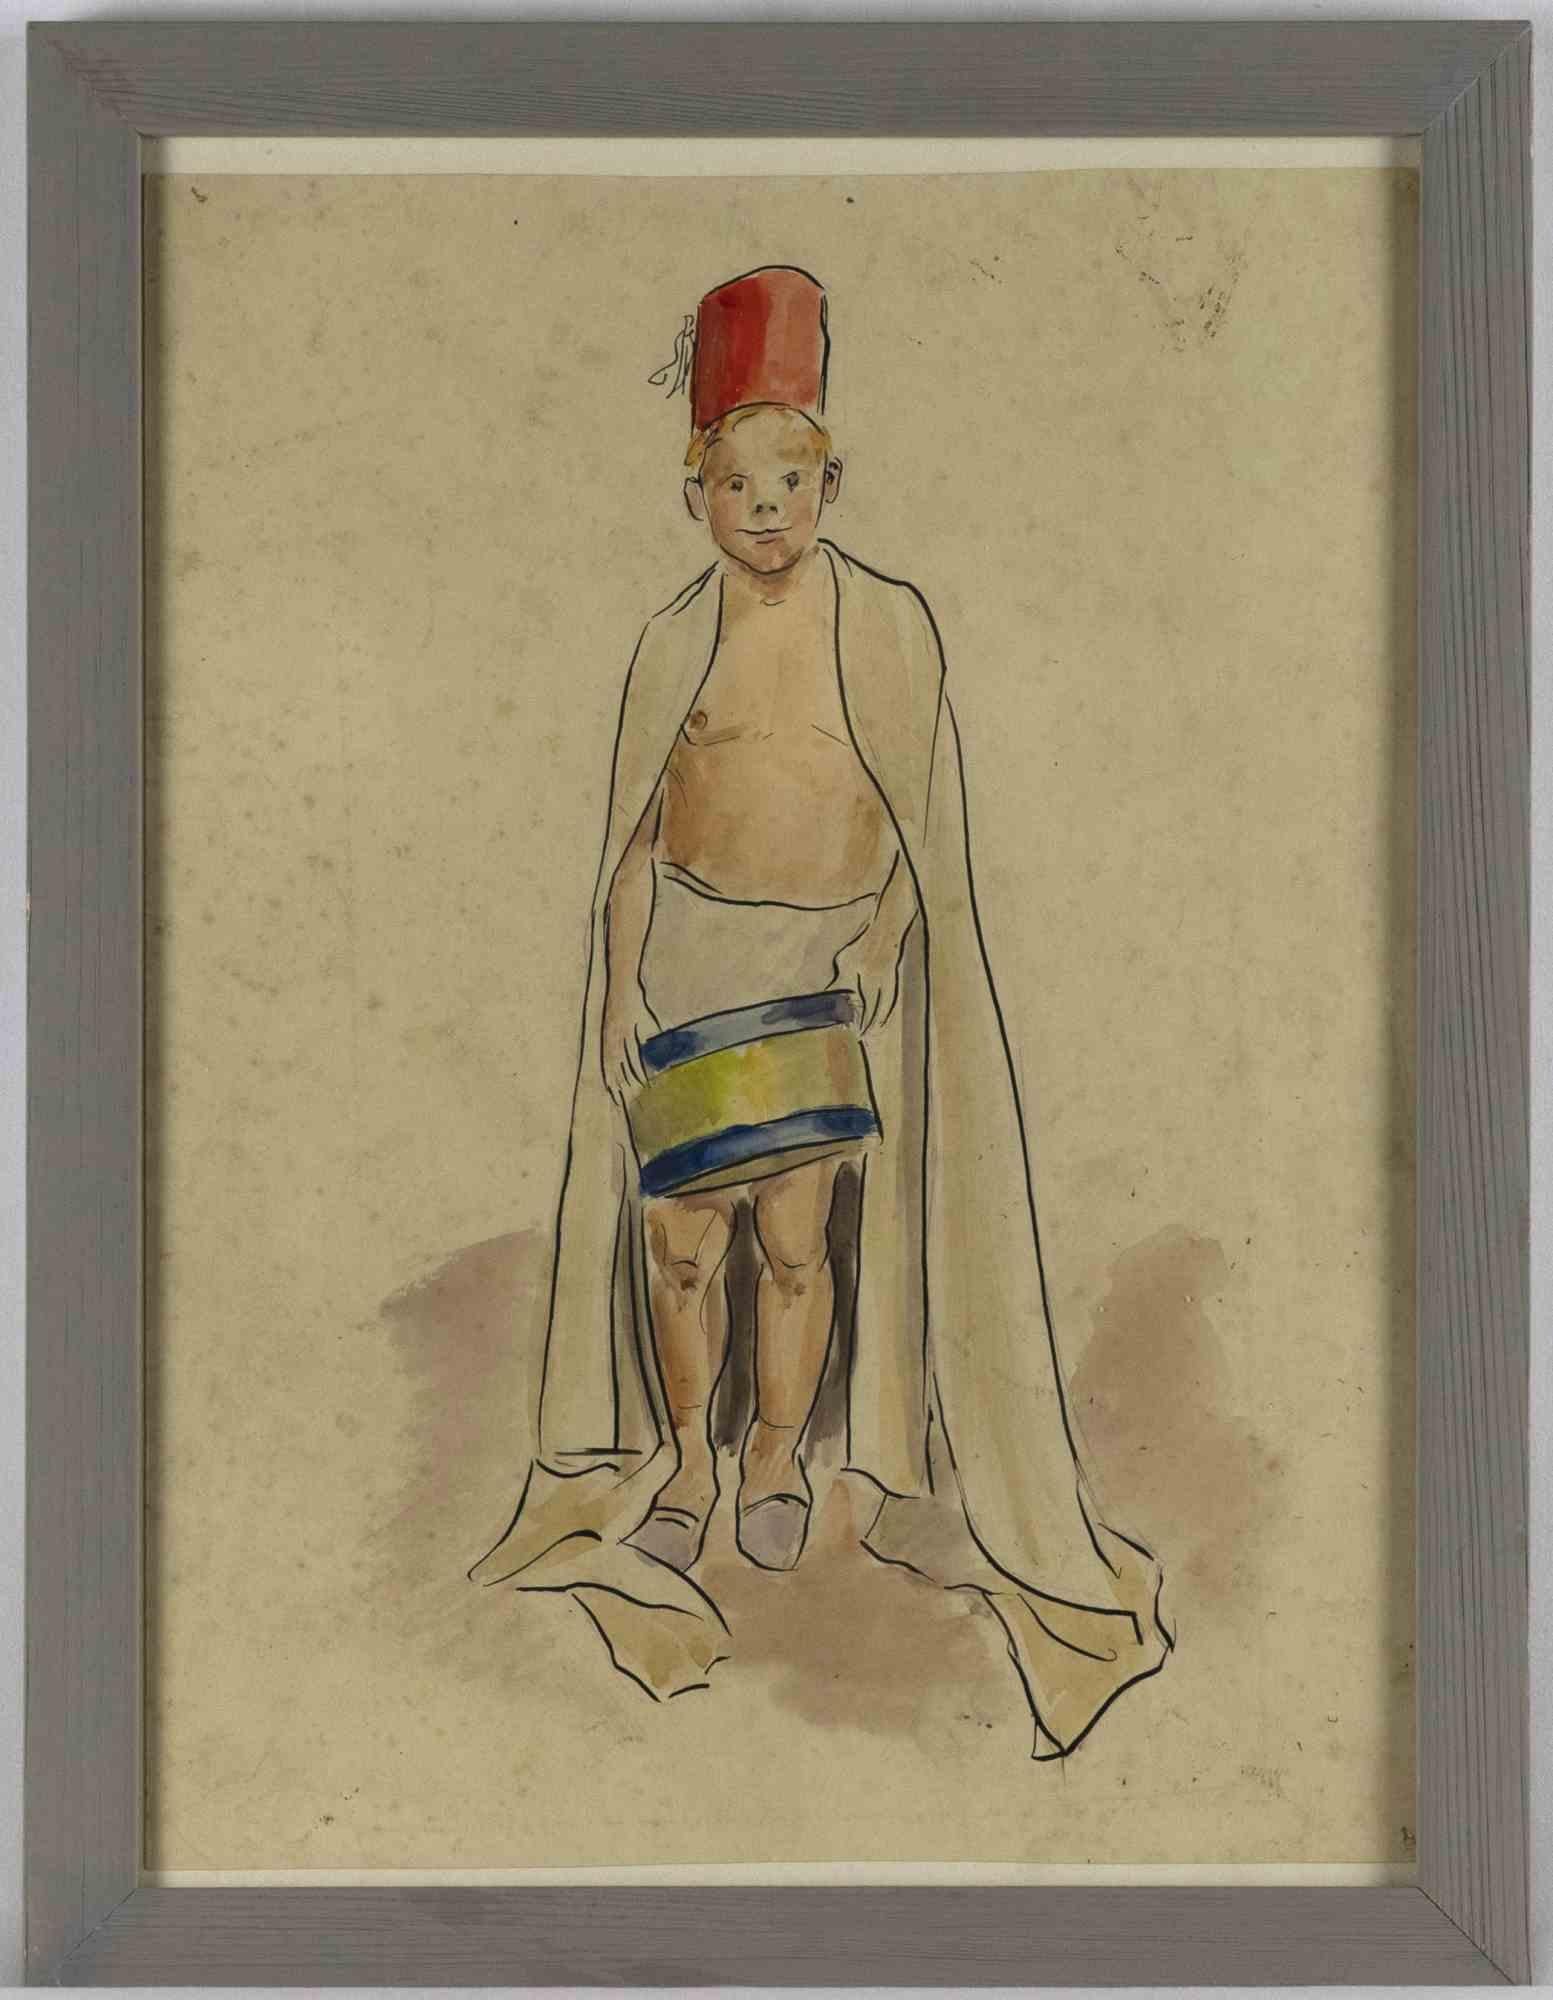 Arab Child-  Drawing - Mid 20th century - Art by Unknown